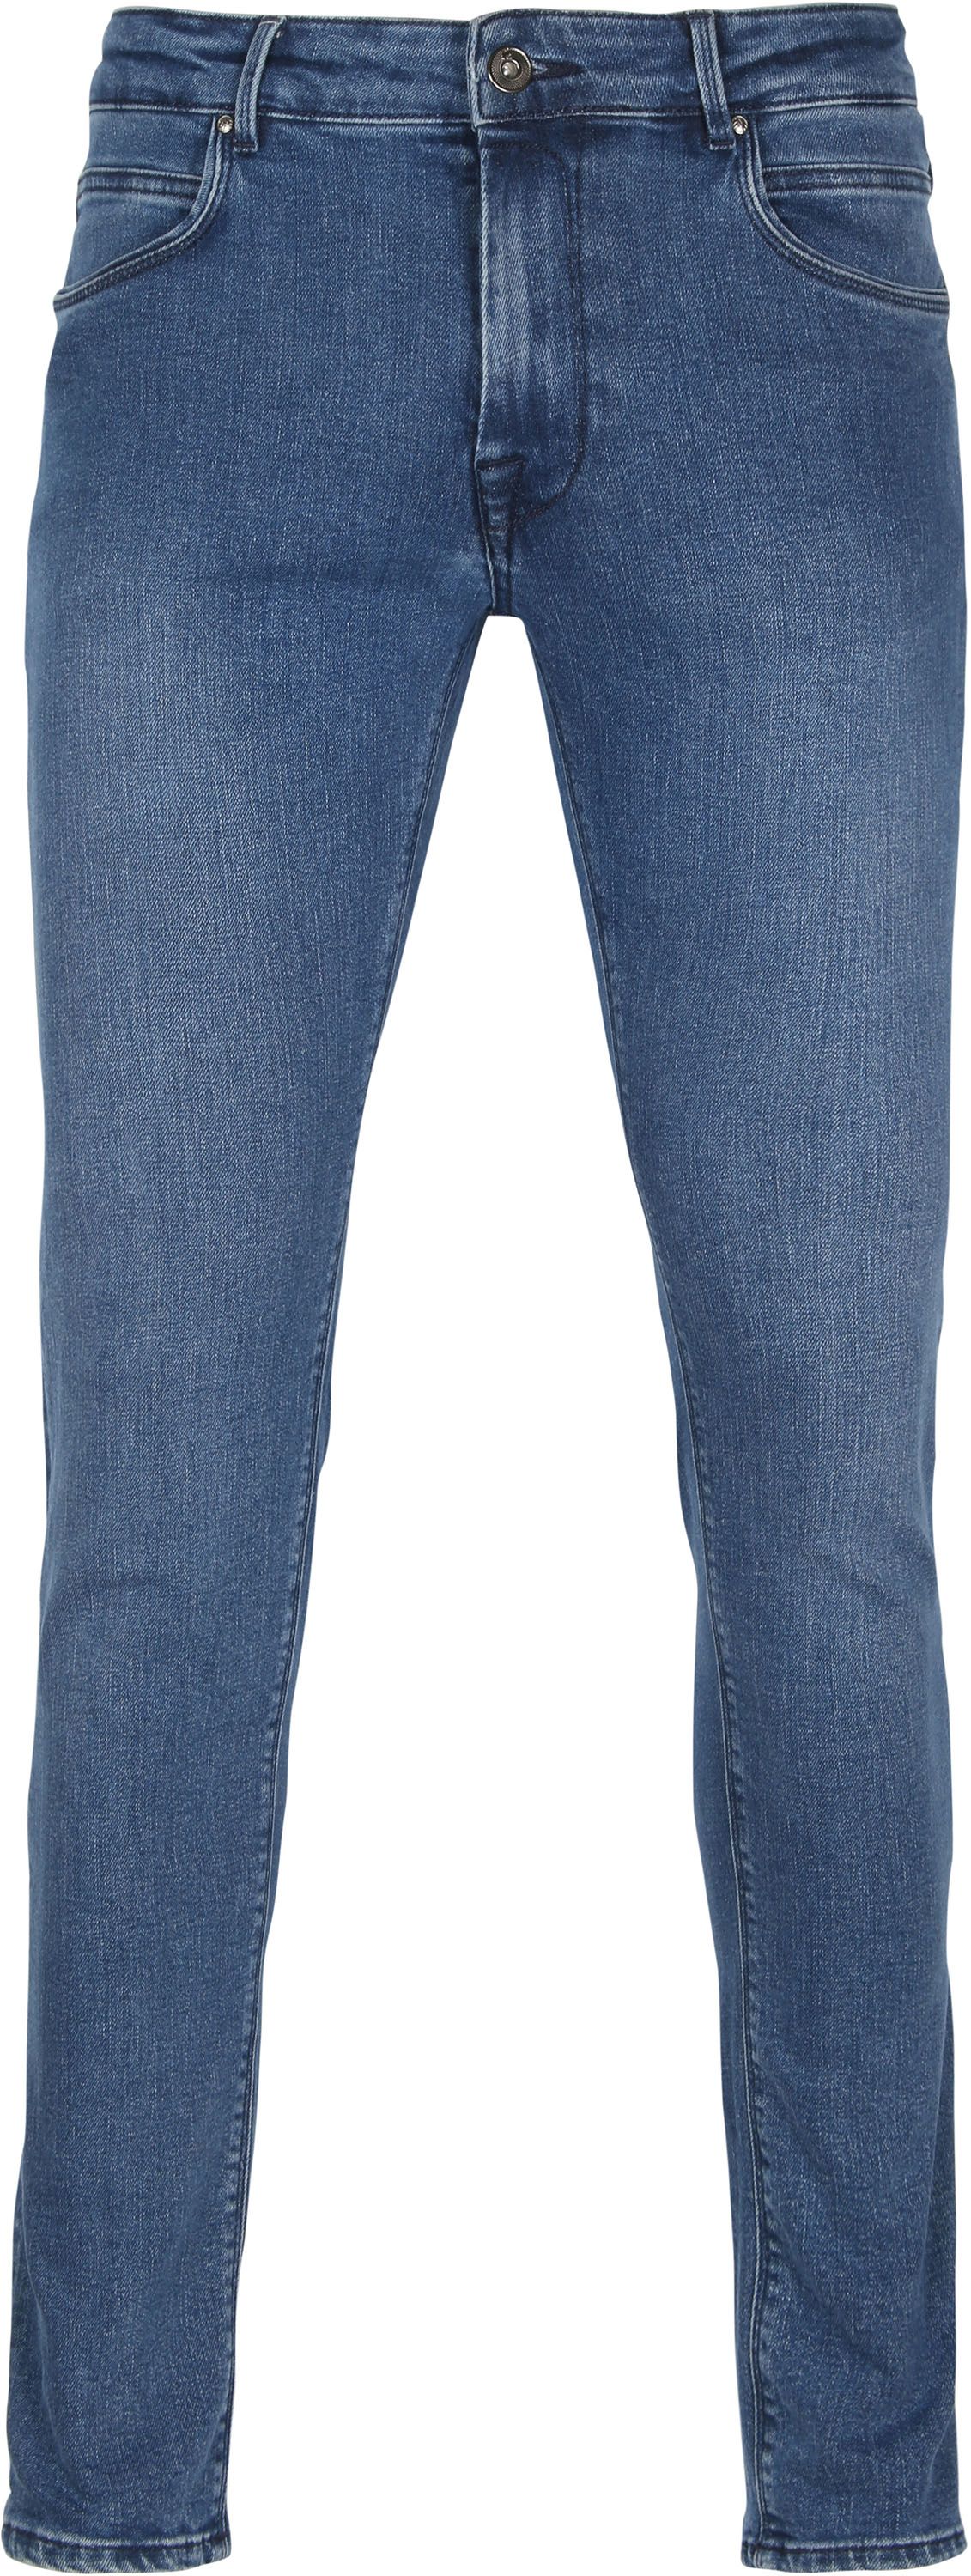 Suitable Hume Jeans Mid Blue size W 31